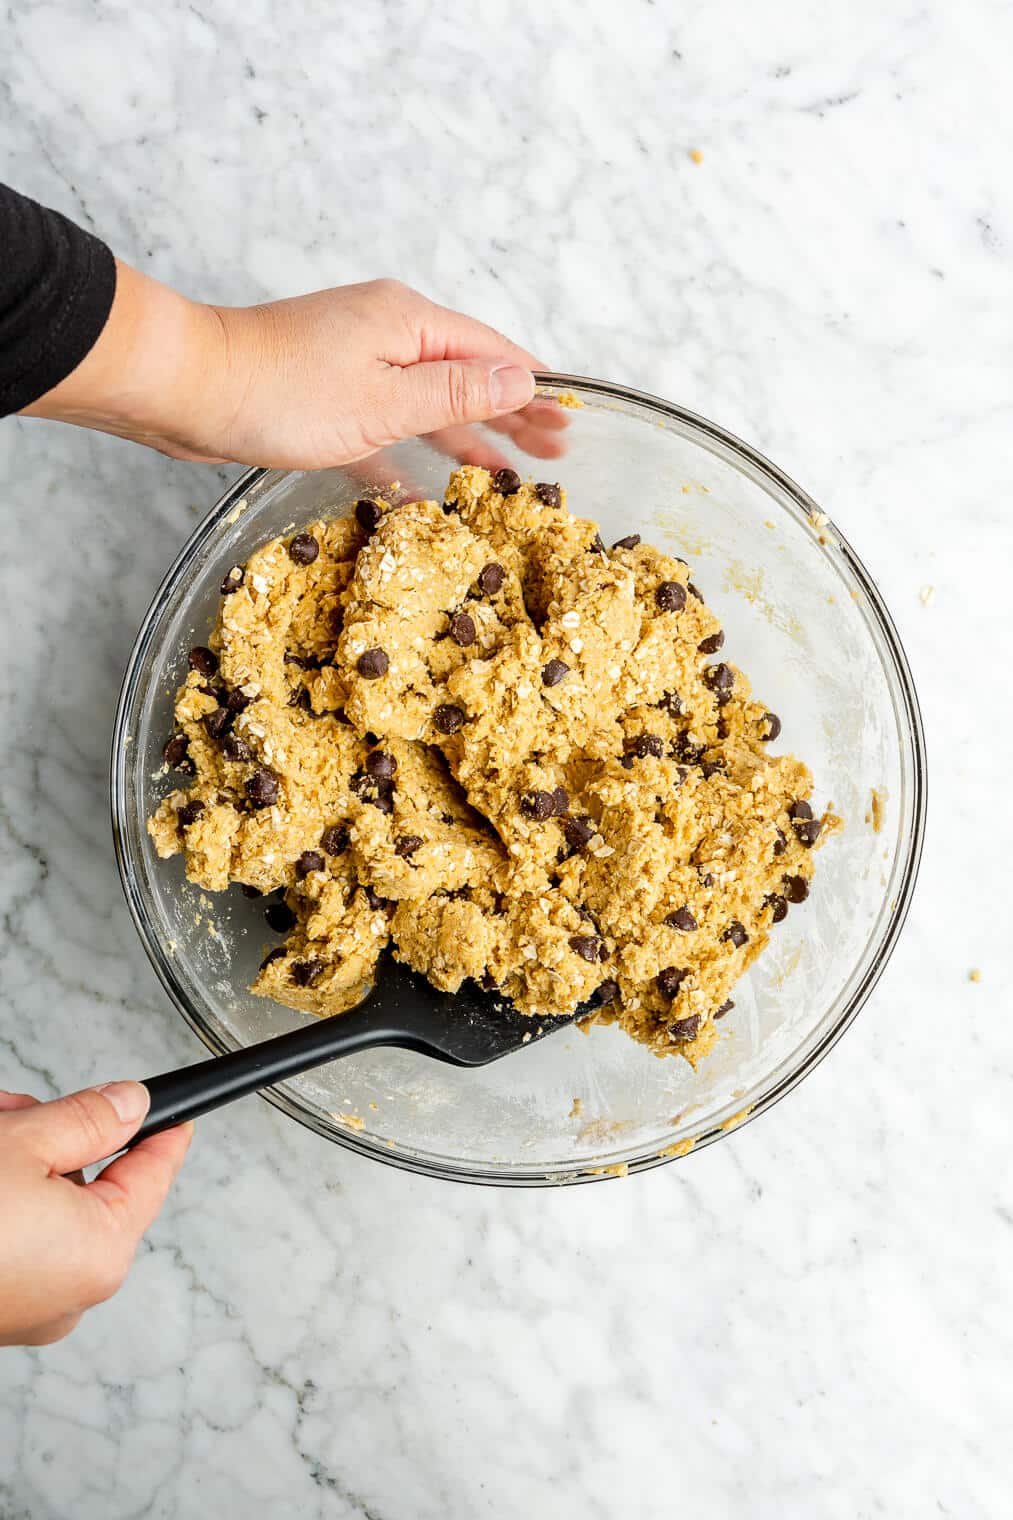 A person using a black spatula to stir chocolate chips into oatmeal lactation cookie dough.